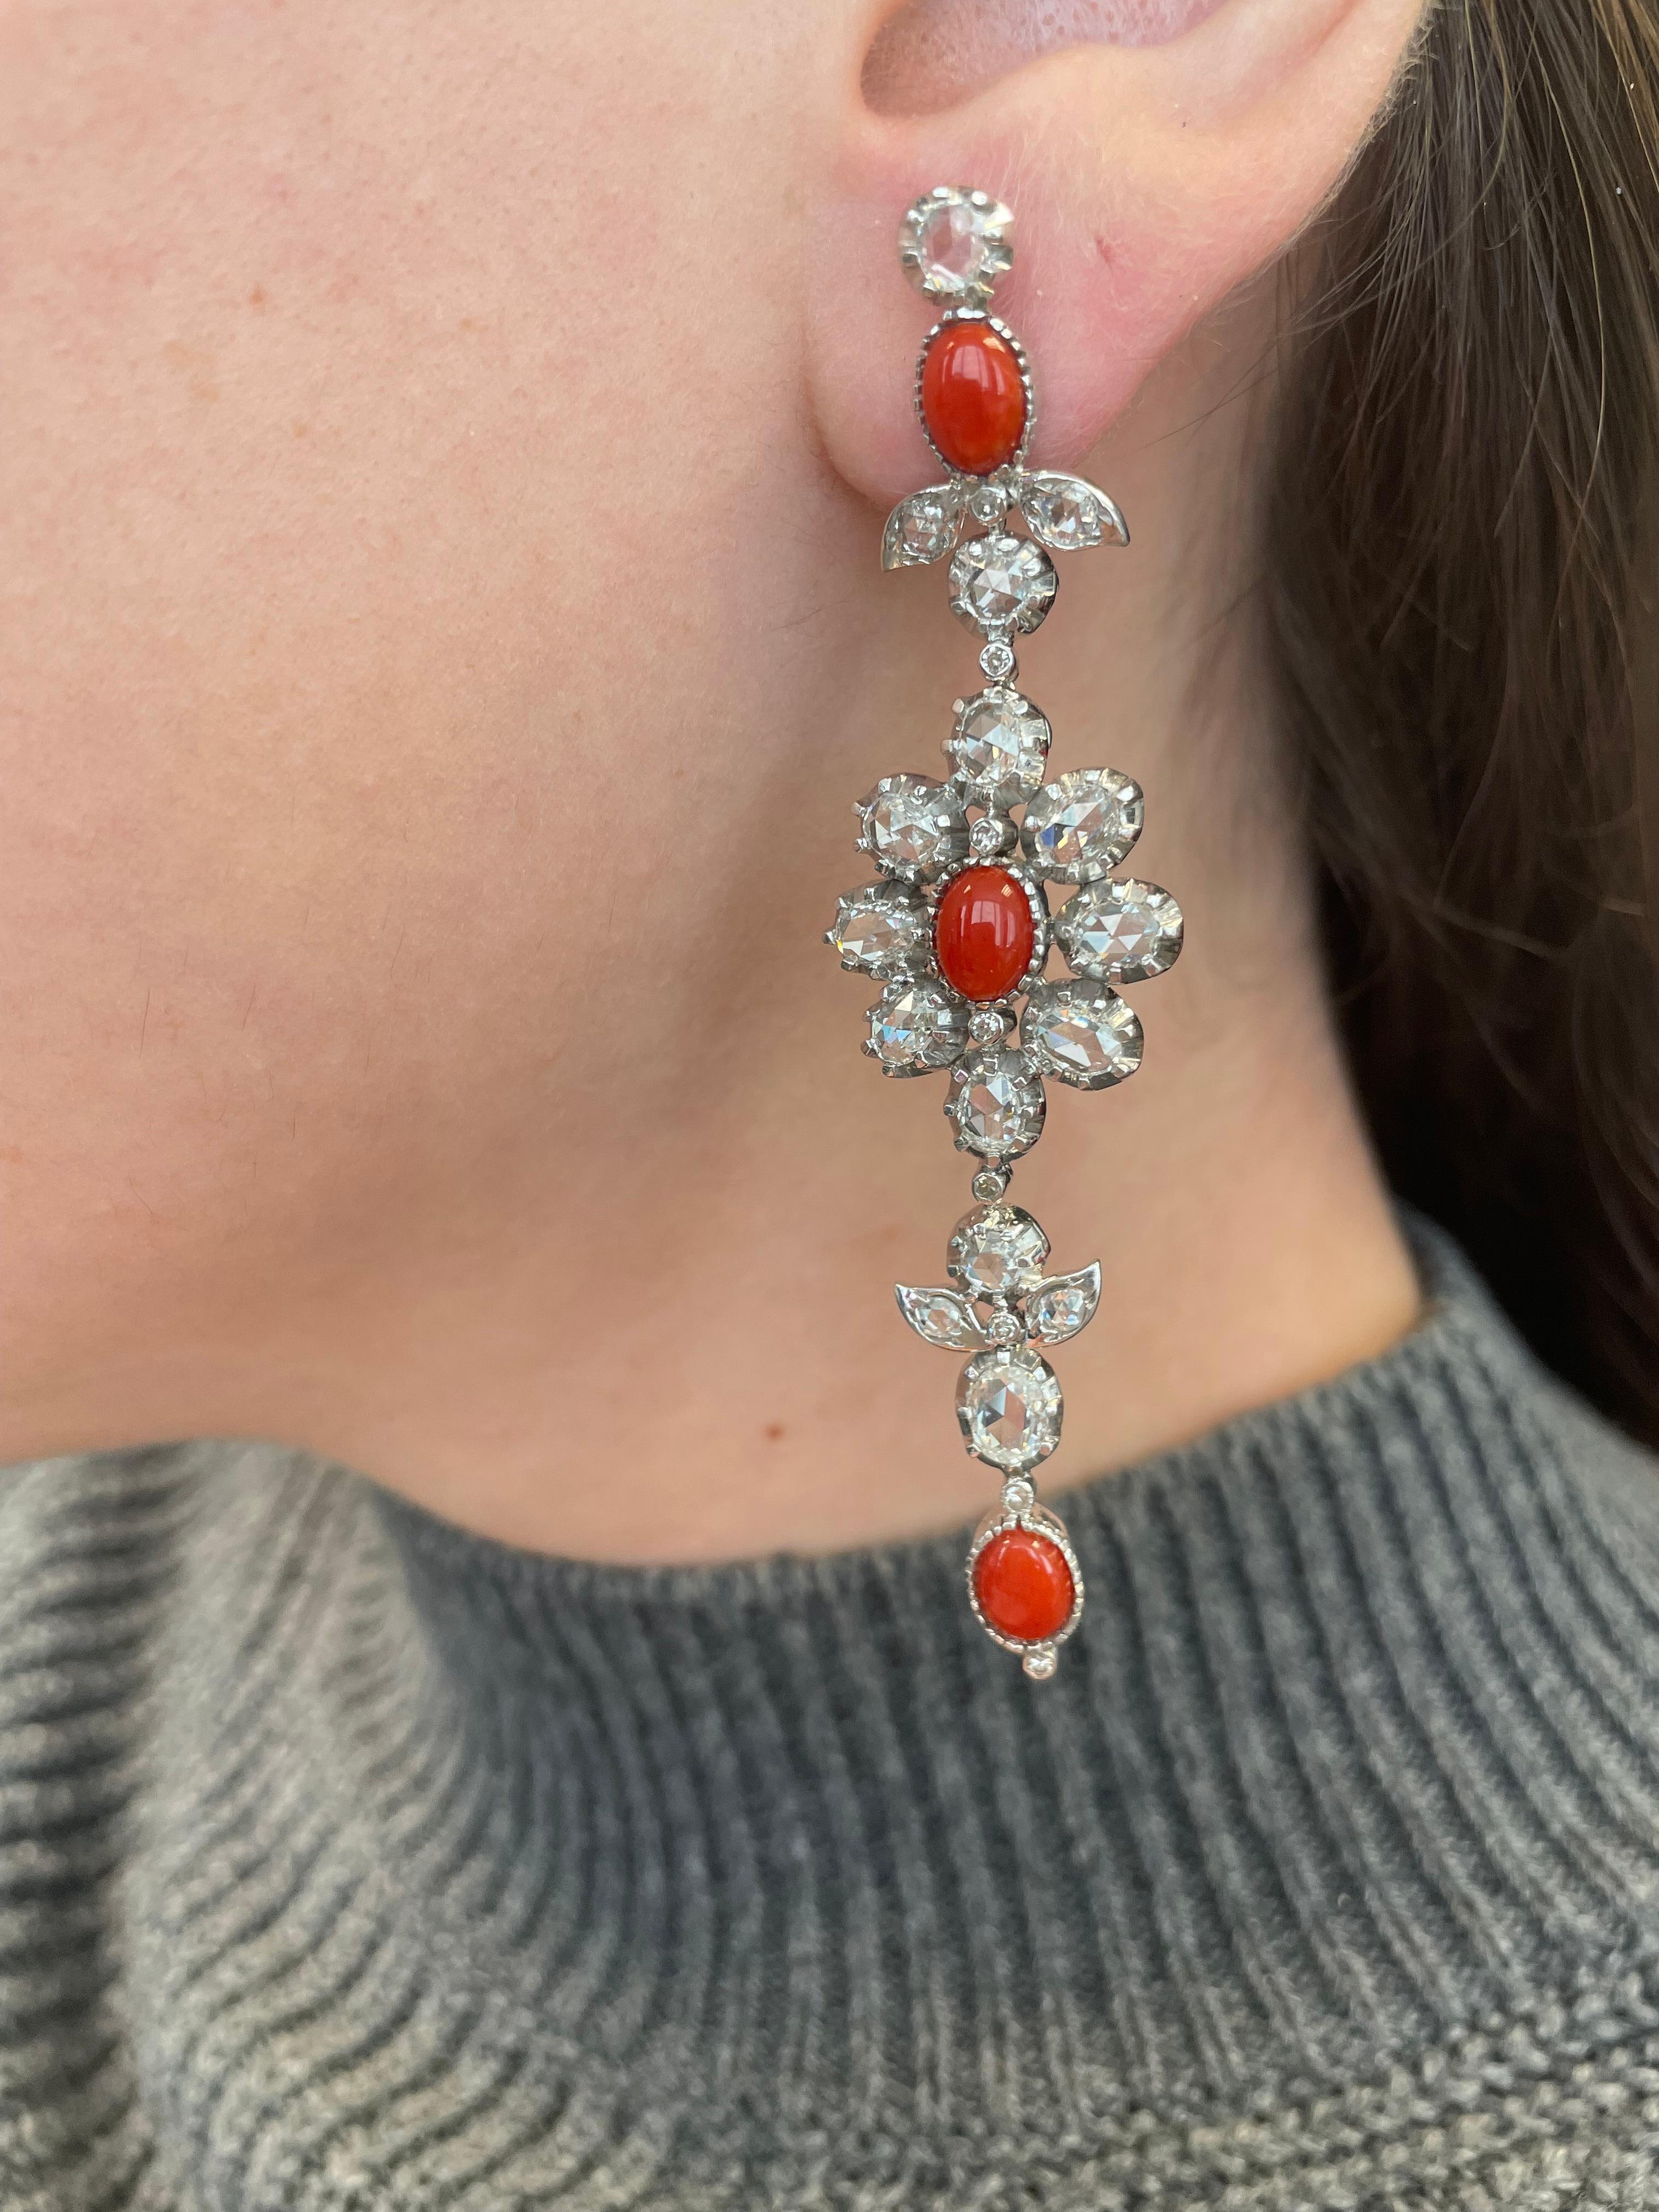 Gorgeous rose cut diamond and coral earrings with a vintage like look. 
4.54 carats of rose cut diamonds, approximately G/H color and VS2/SI1 clarity. Complimented with 6 cabochon coral, 18-karat white gold.
Accommodated with an up to date appraisal